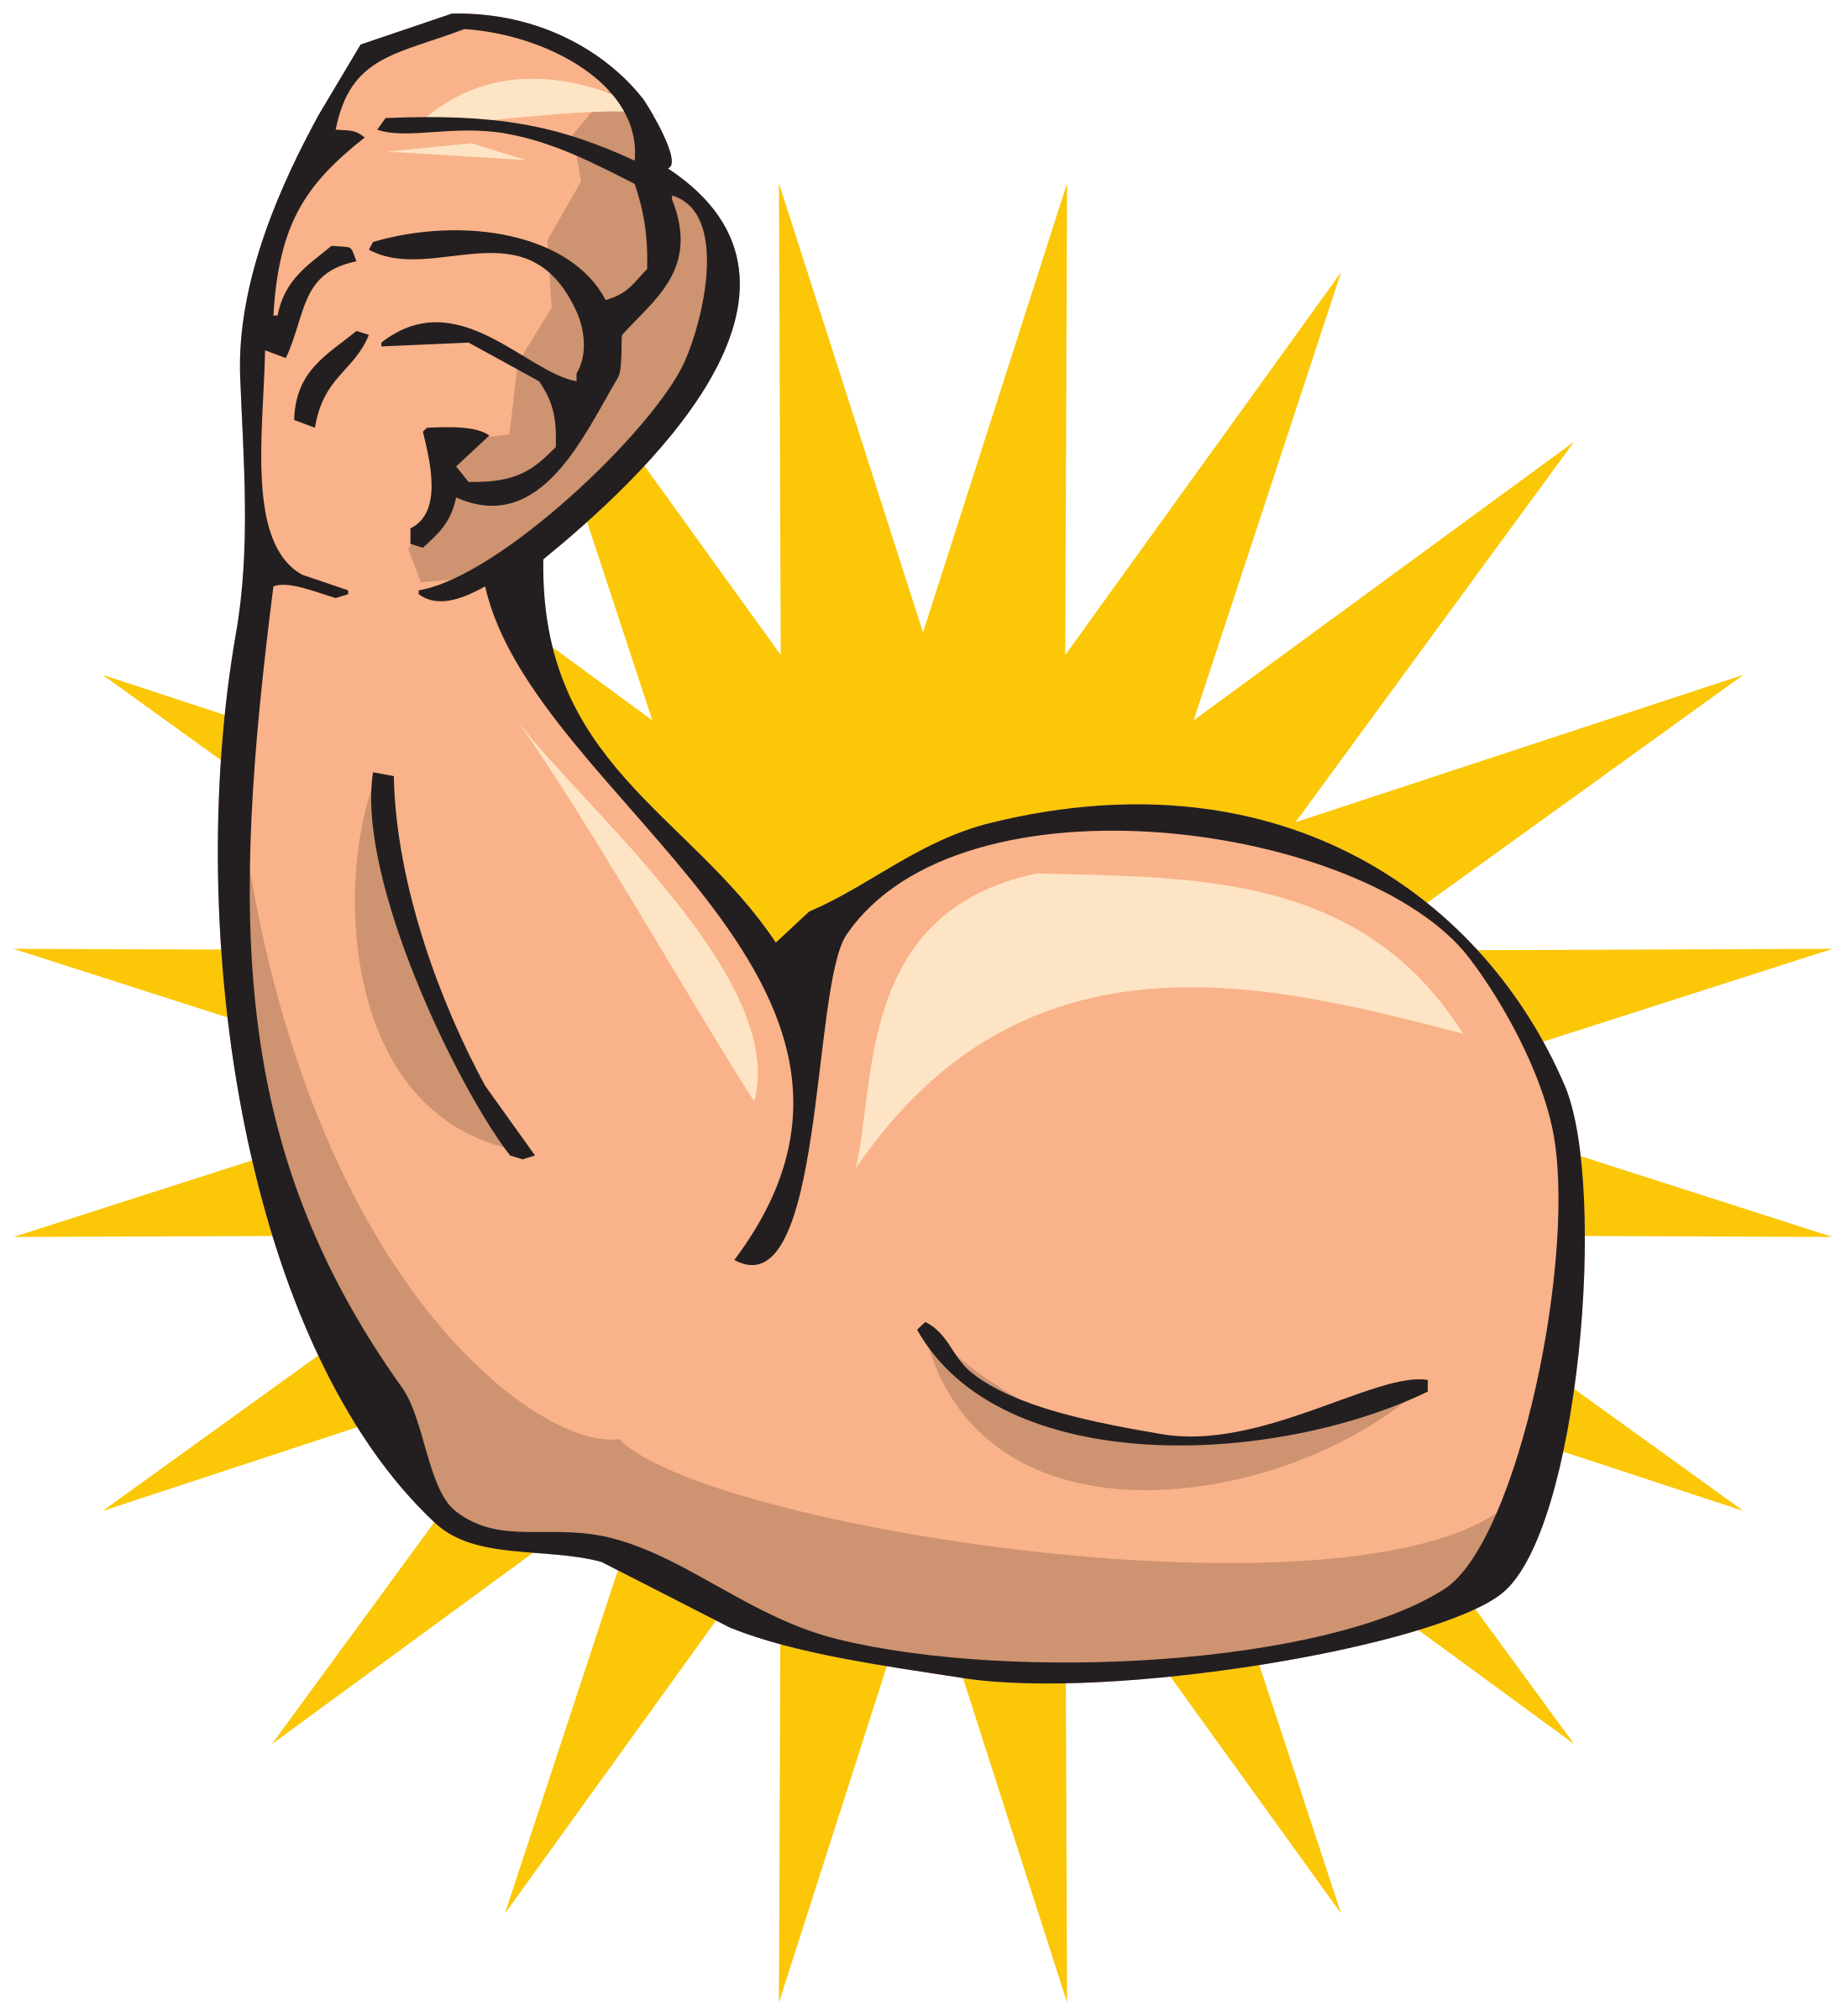 Strong arm big image. Writer clipart sentence